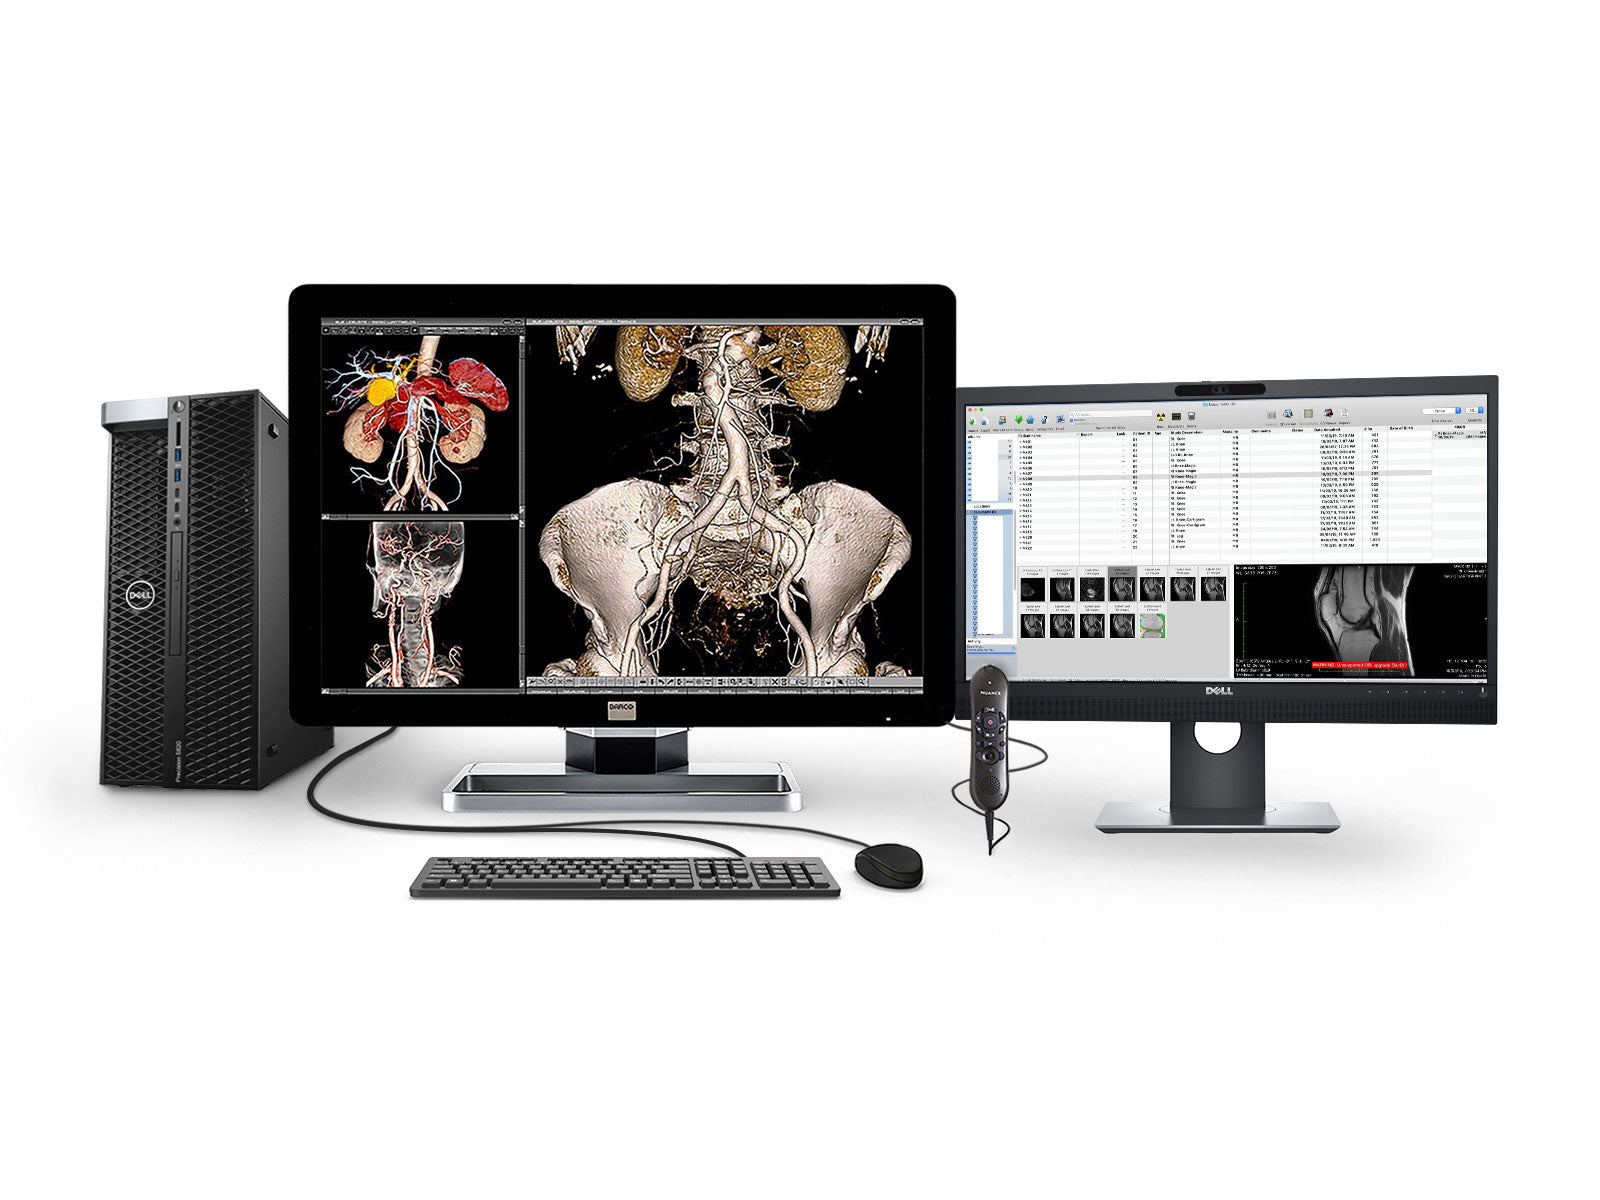 Complete PACS General Radiology Station | Barco Dell Workstation